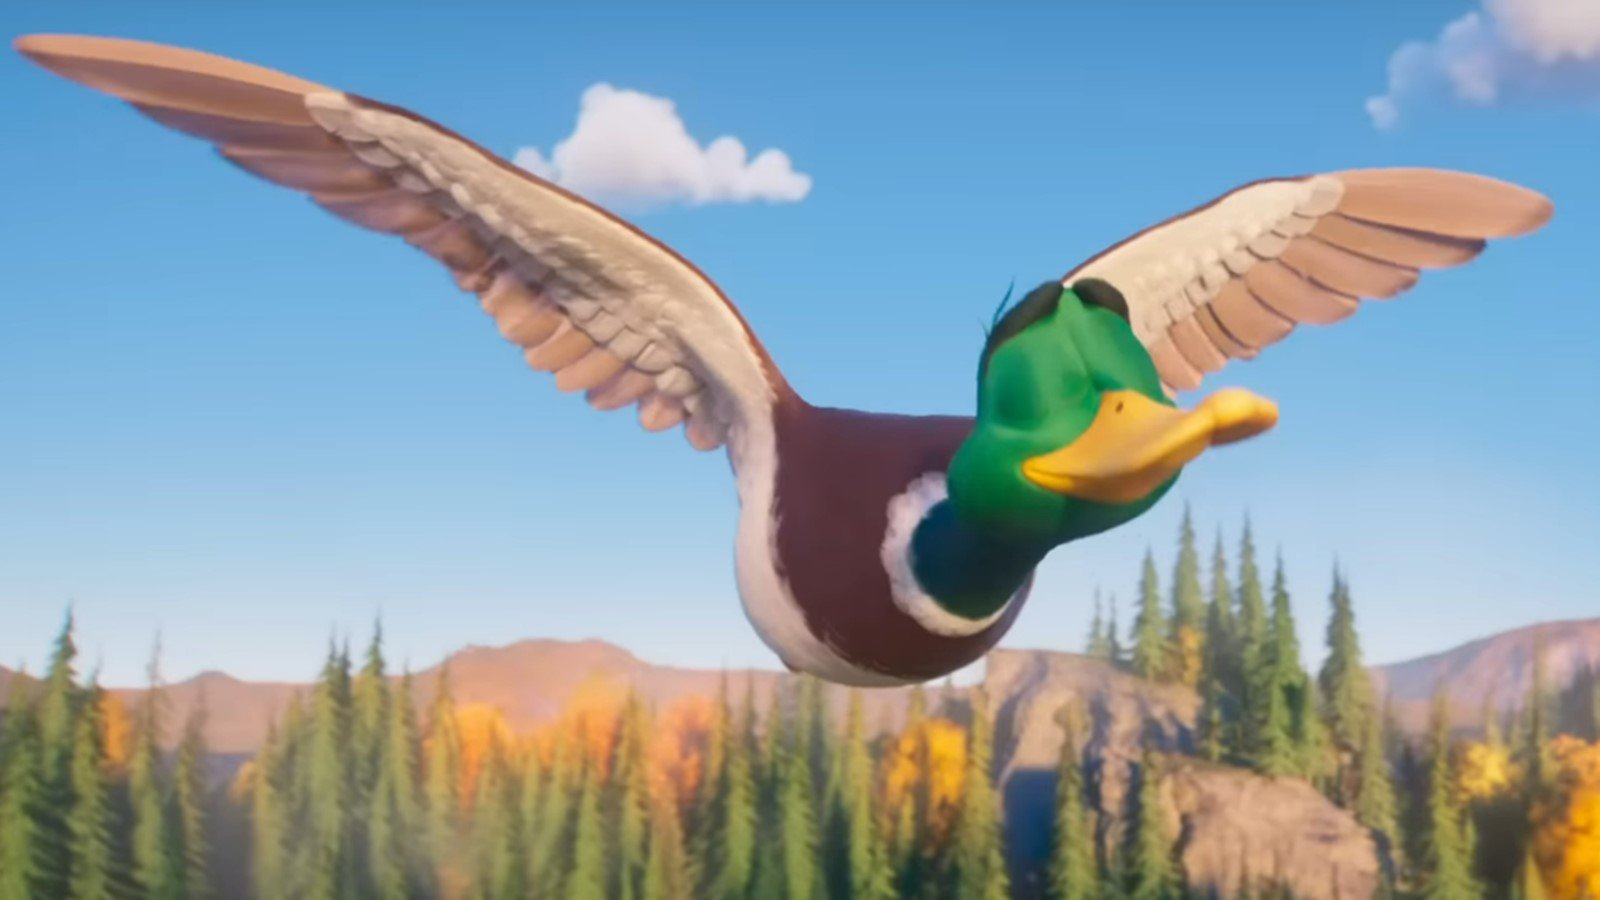 Migration: the first teaser of the new animated film from Illumination shows the protagonists